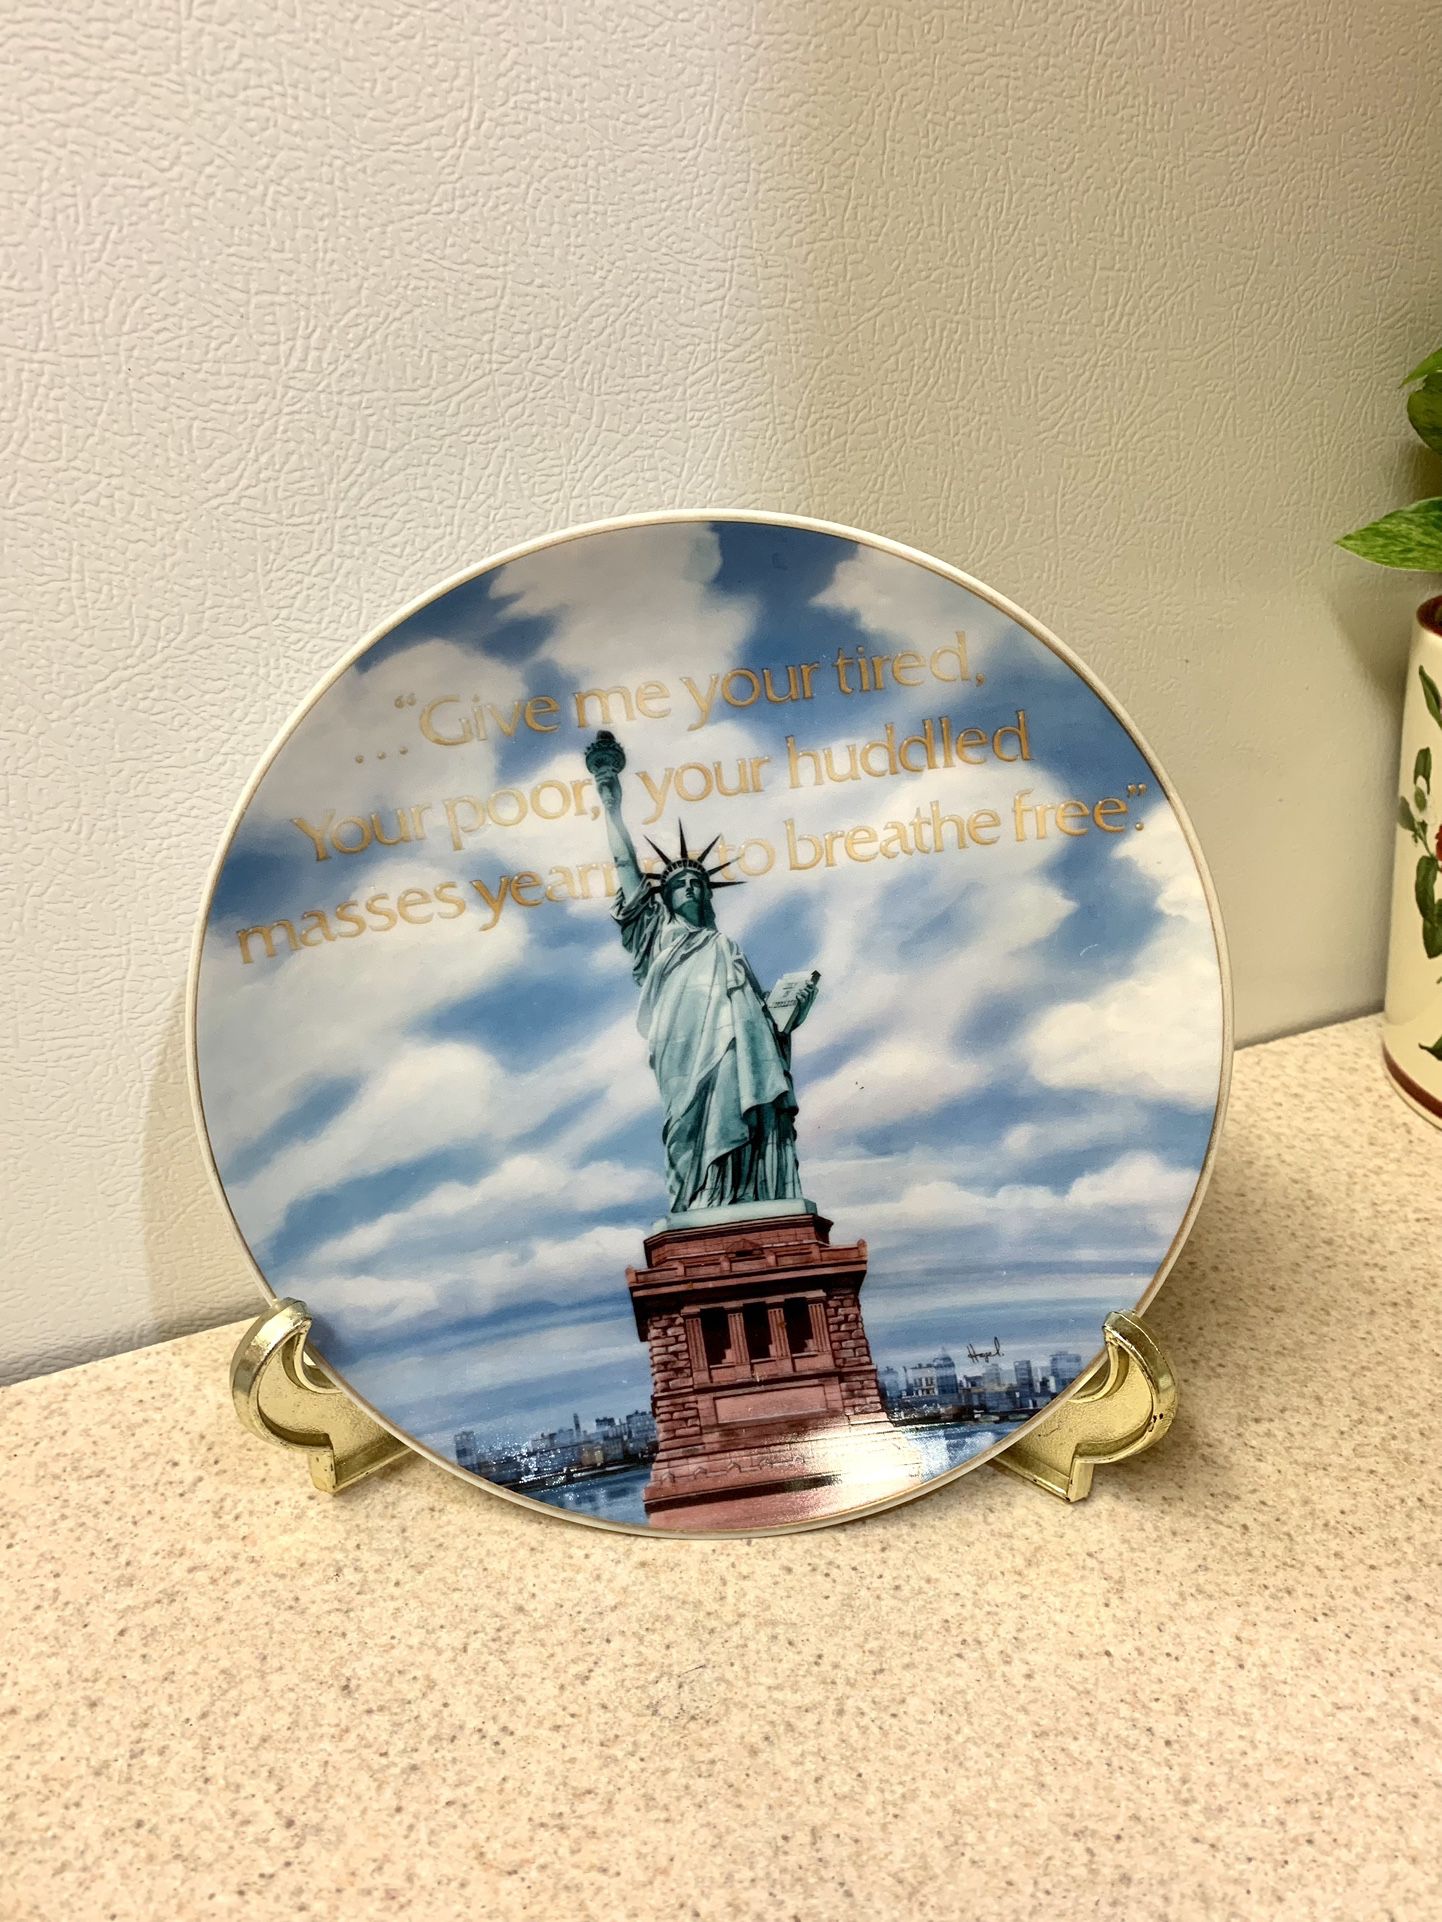 Plate "Statue of Liberty 1985